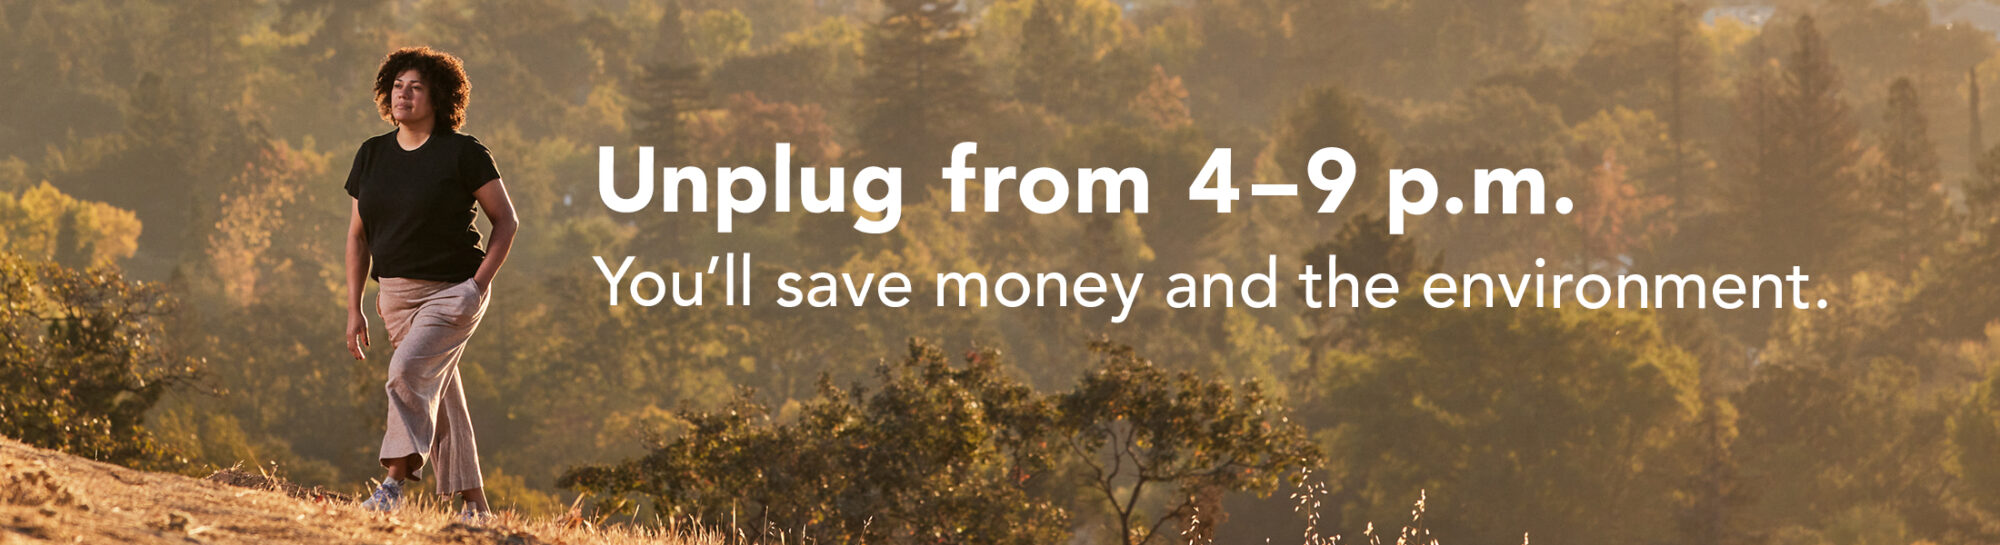 Unplug from 4-9pm to save money and the environment